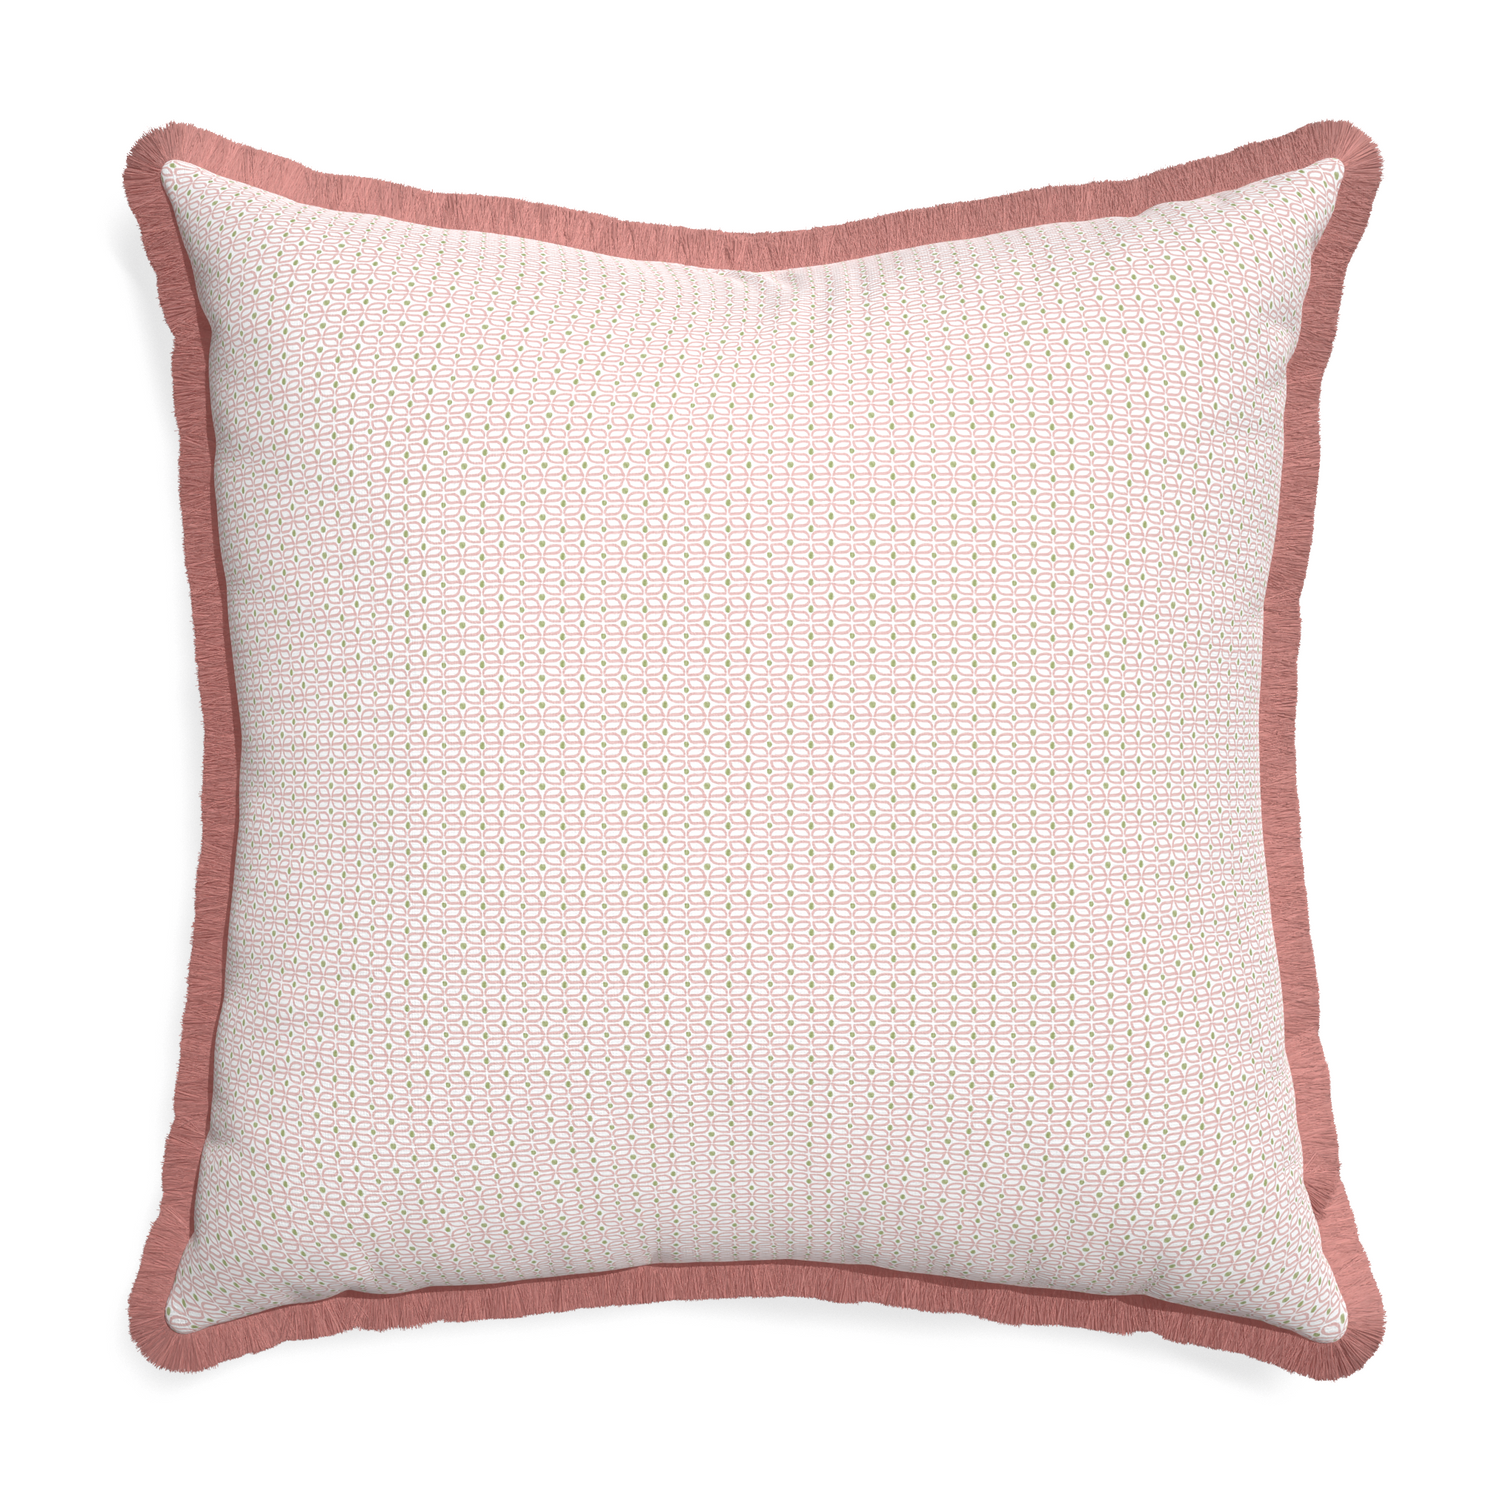 Euro-sham loomi pink custom pillow with d fringe on white background